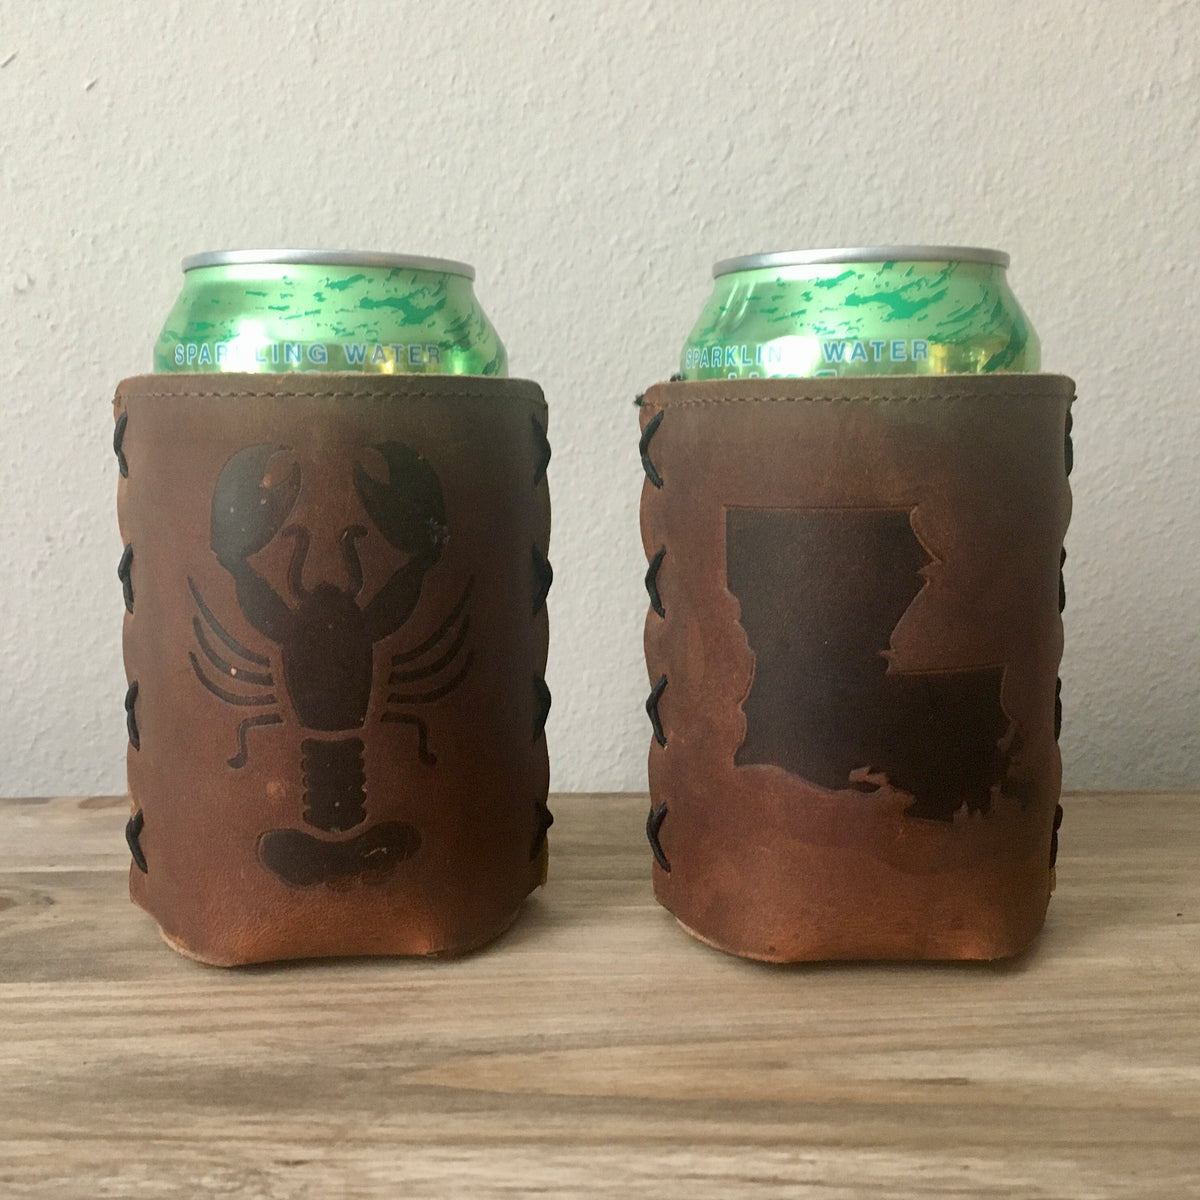 State Fair Beer Koozie Can Cooler – Minnesota Awesome